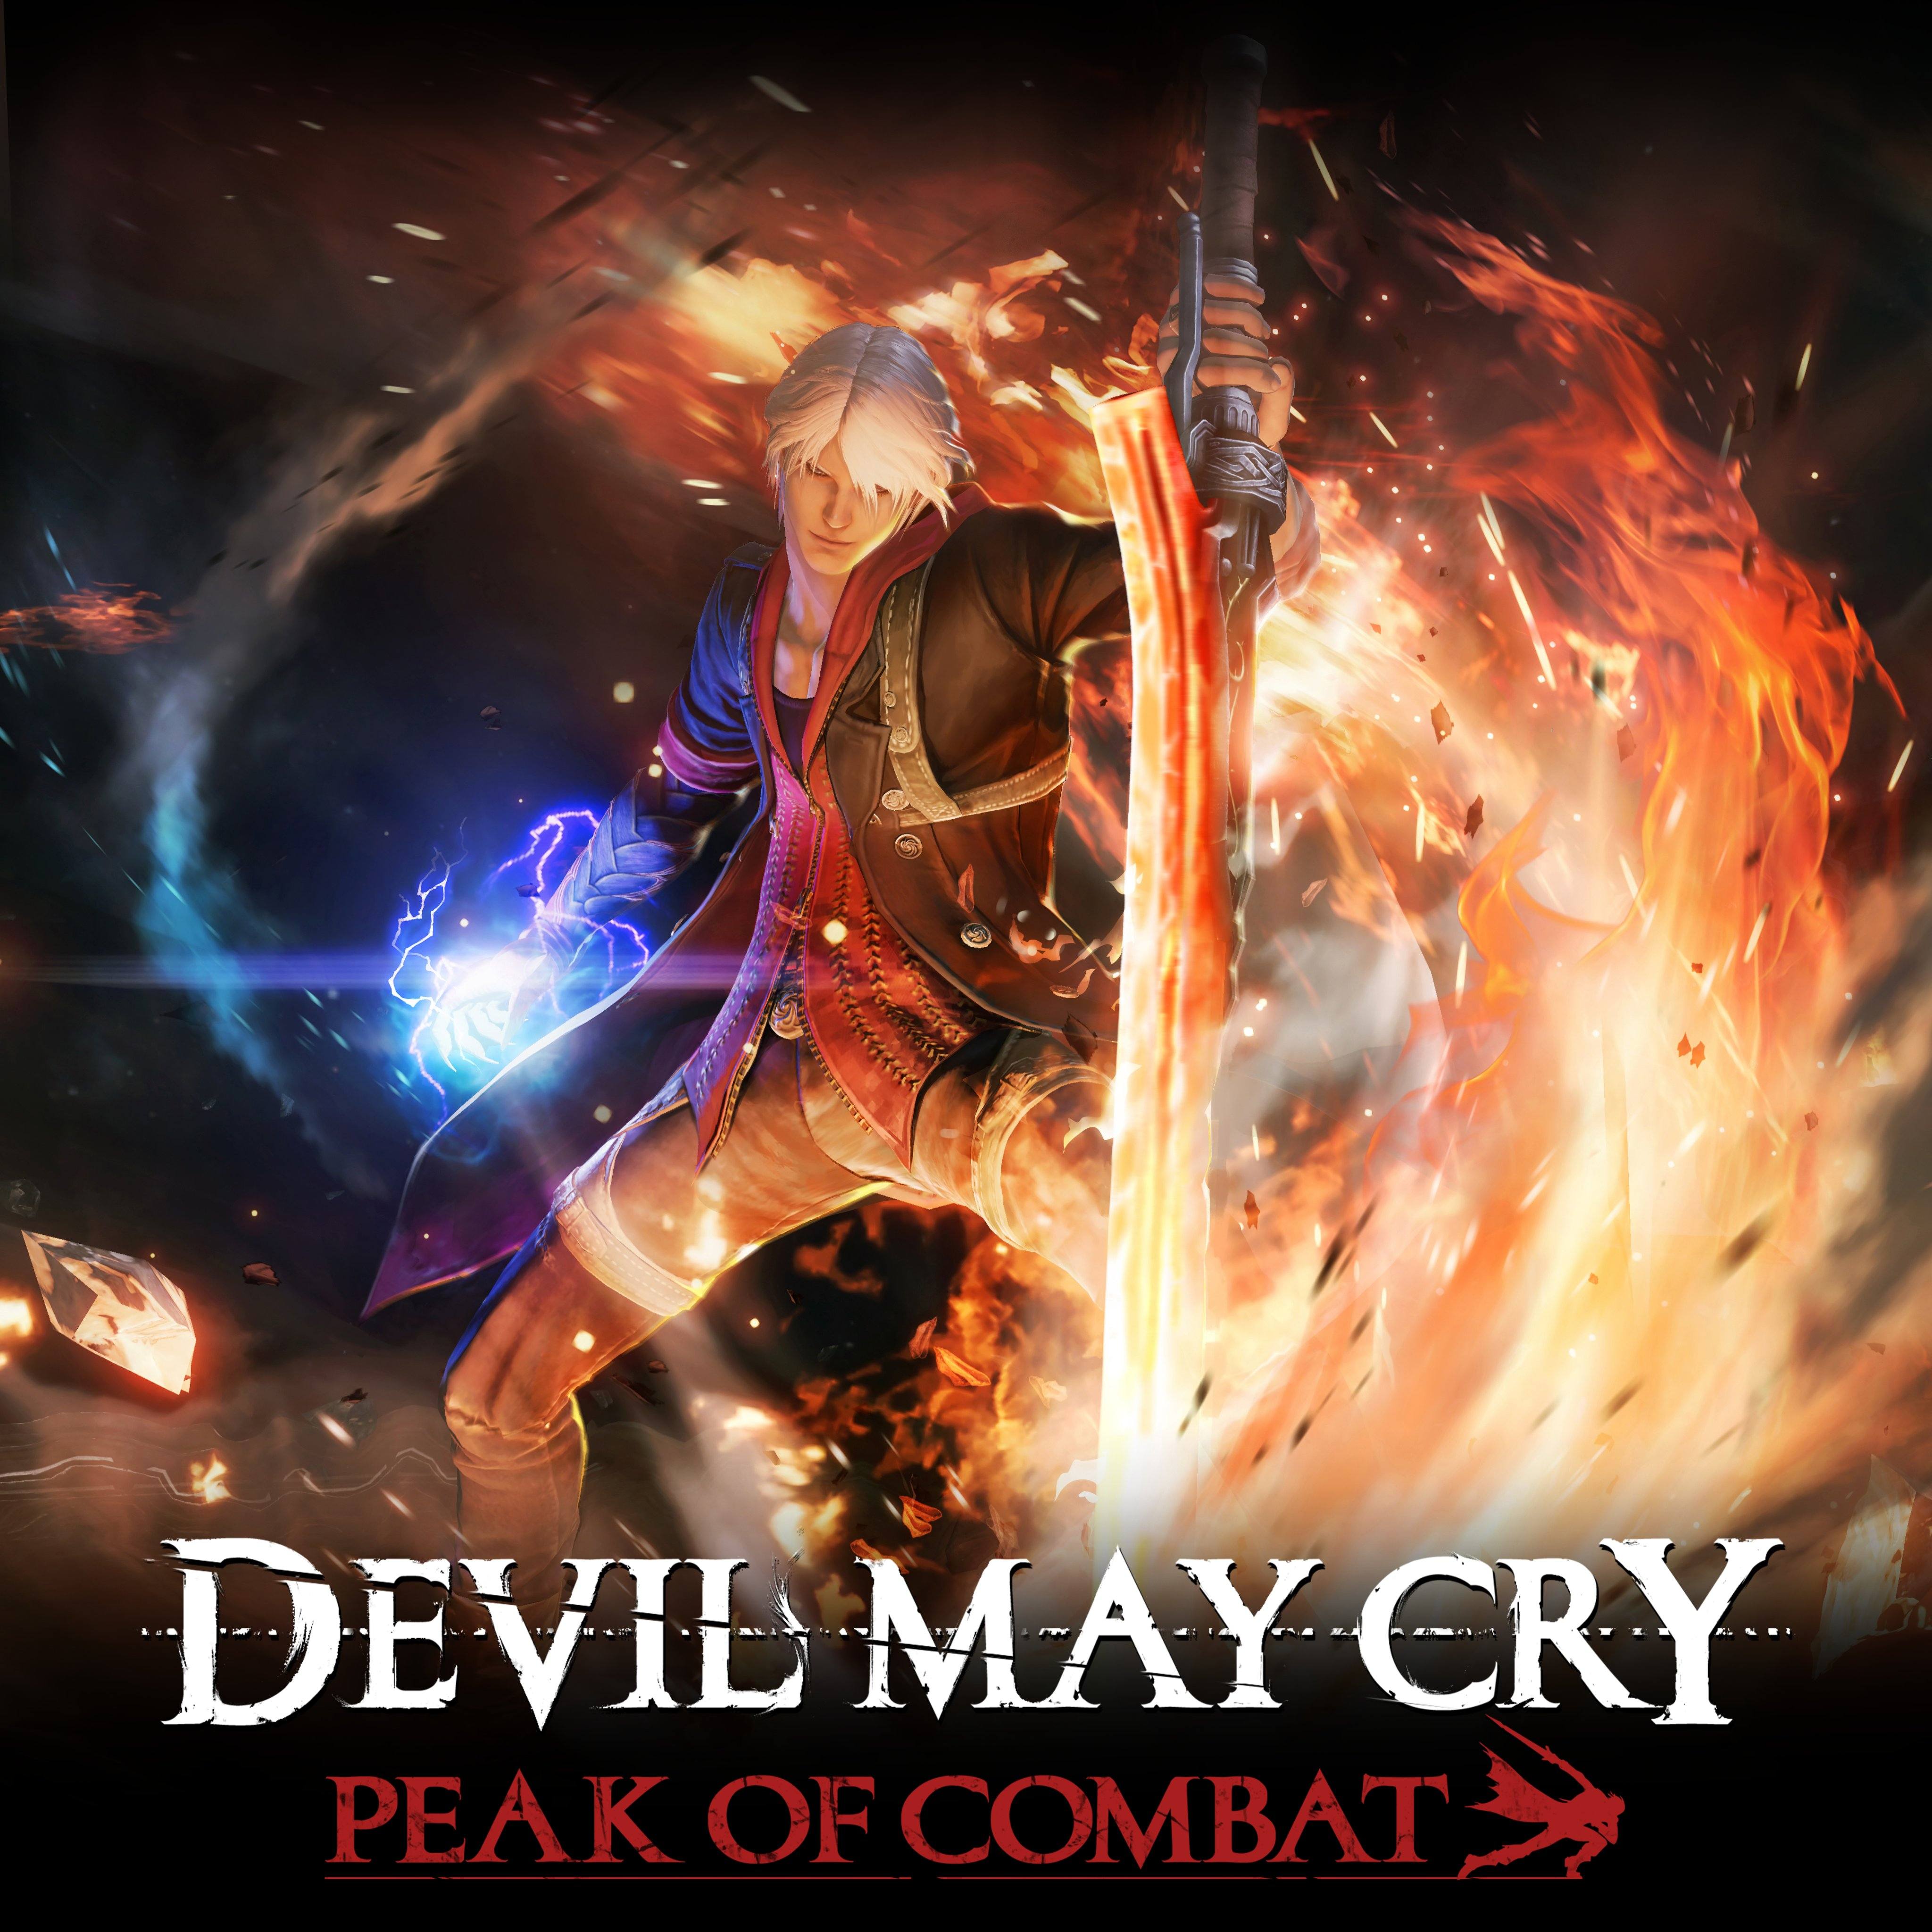 Devil May Cry: Peak of Combat Open Beta Begins This July